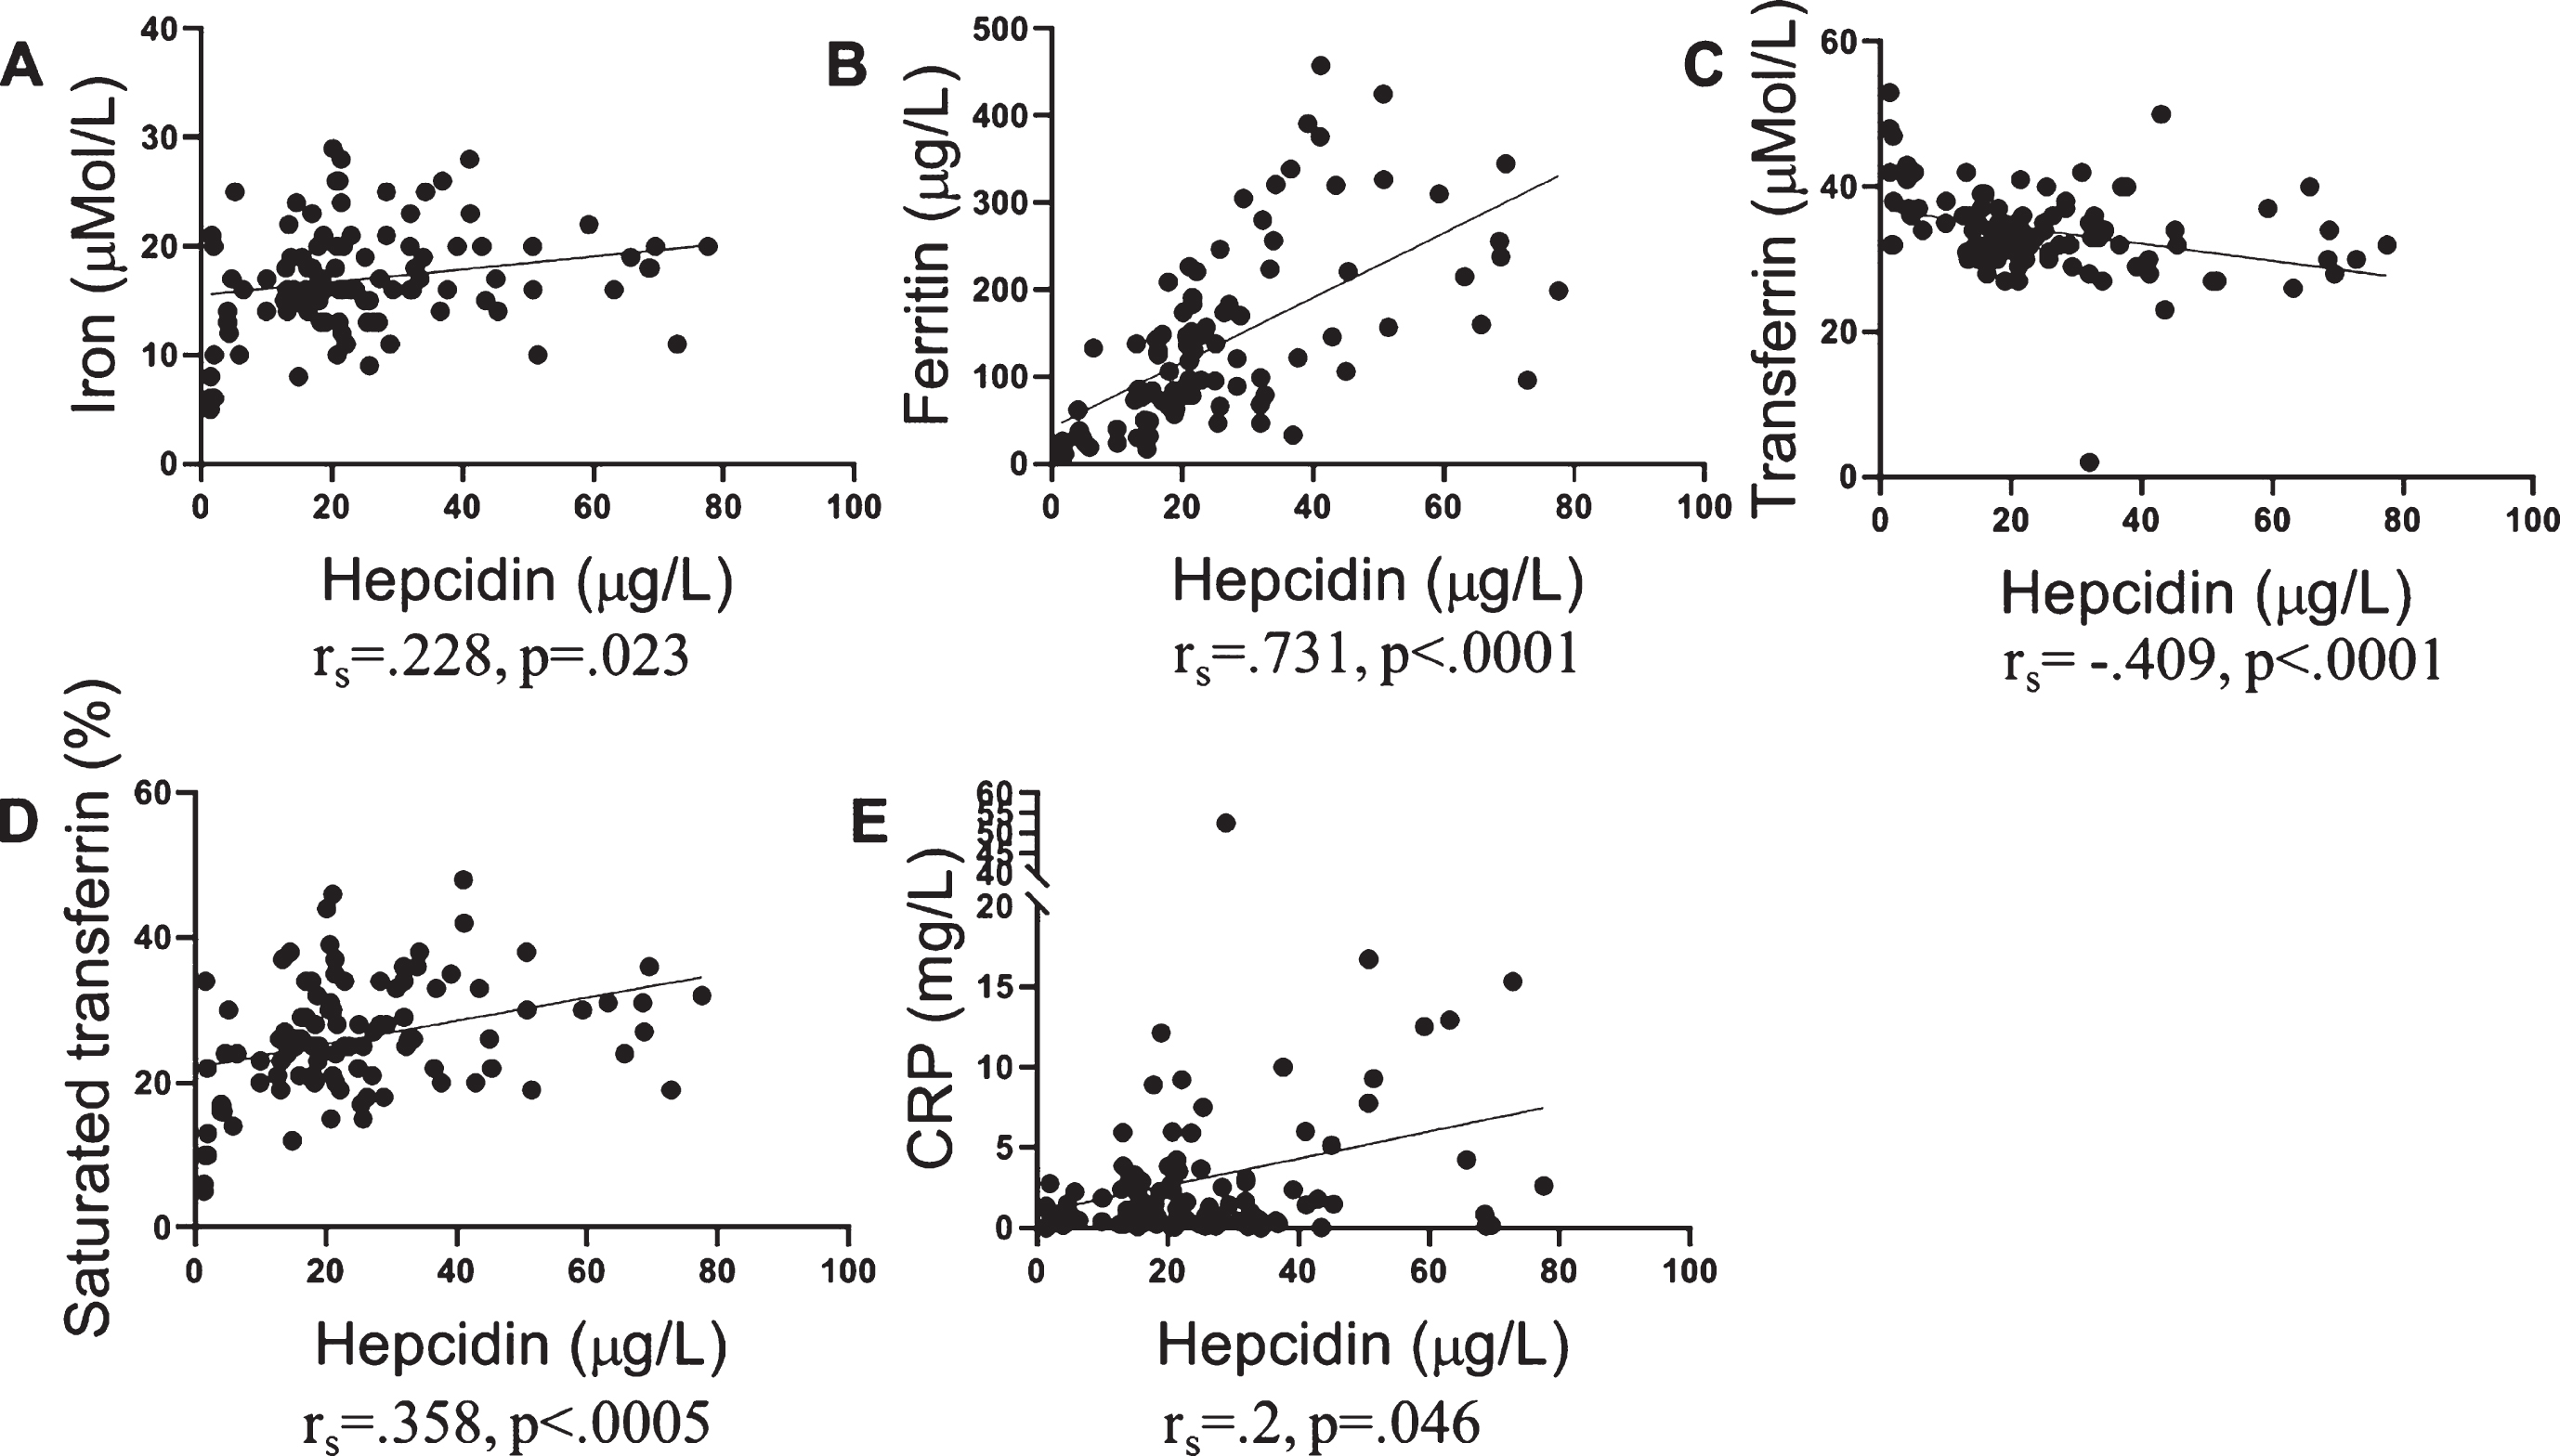 Association of serum hepcidin with iron, iron related proteins, and CRP. Serum hepcidin levels correlated with levels of A) serum iron (n = 99), B) serum ferritin (n = 98), C) serum transferrin (n = 99), D) transferrin saturation% (n = 99), and E) C-reactive protein (n = 100), as determined using Spearman’s correlation coefficient (rs).